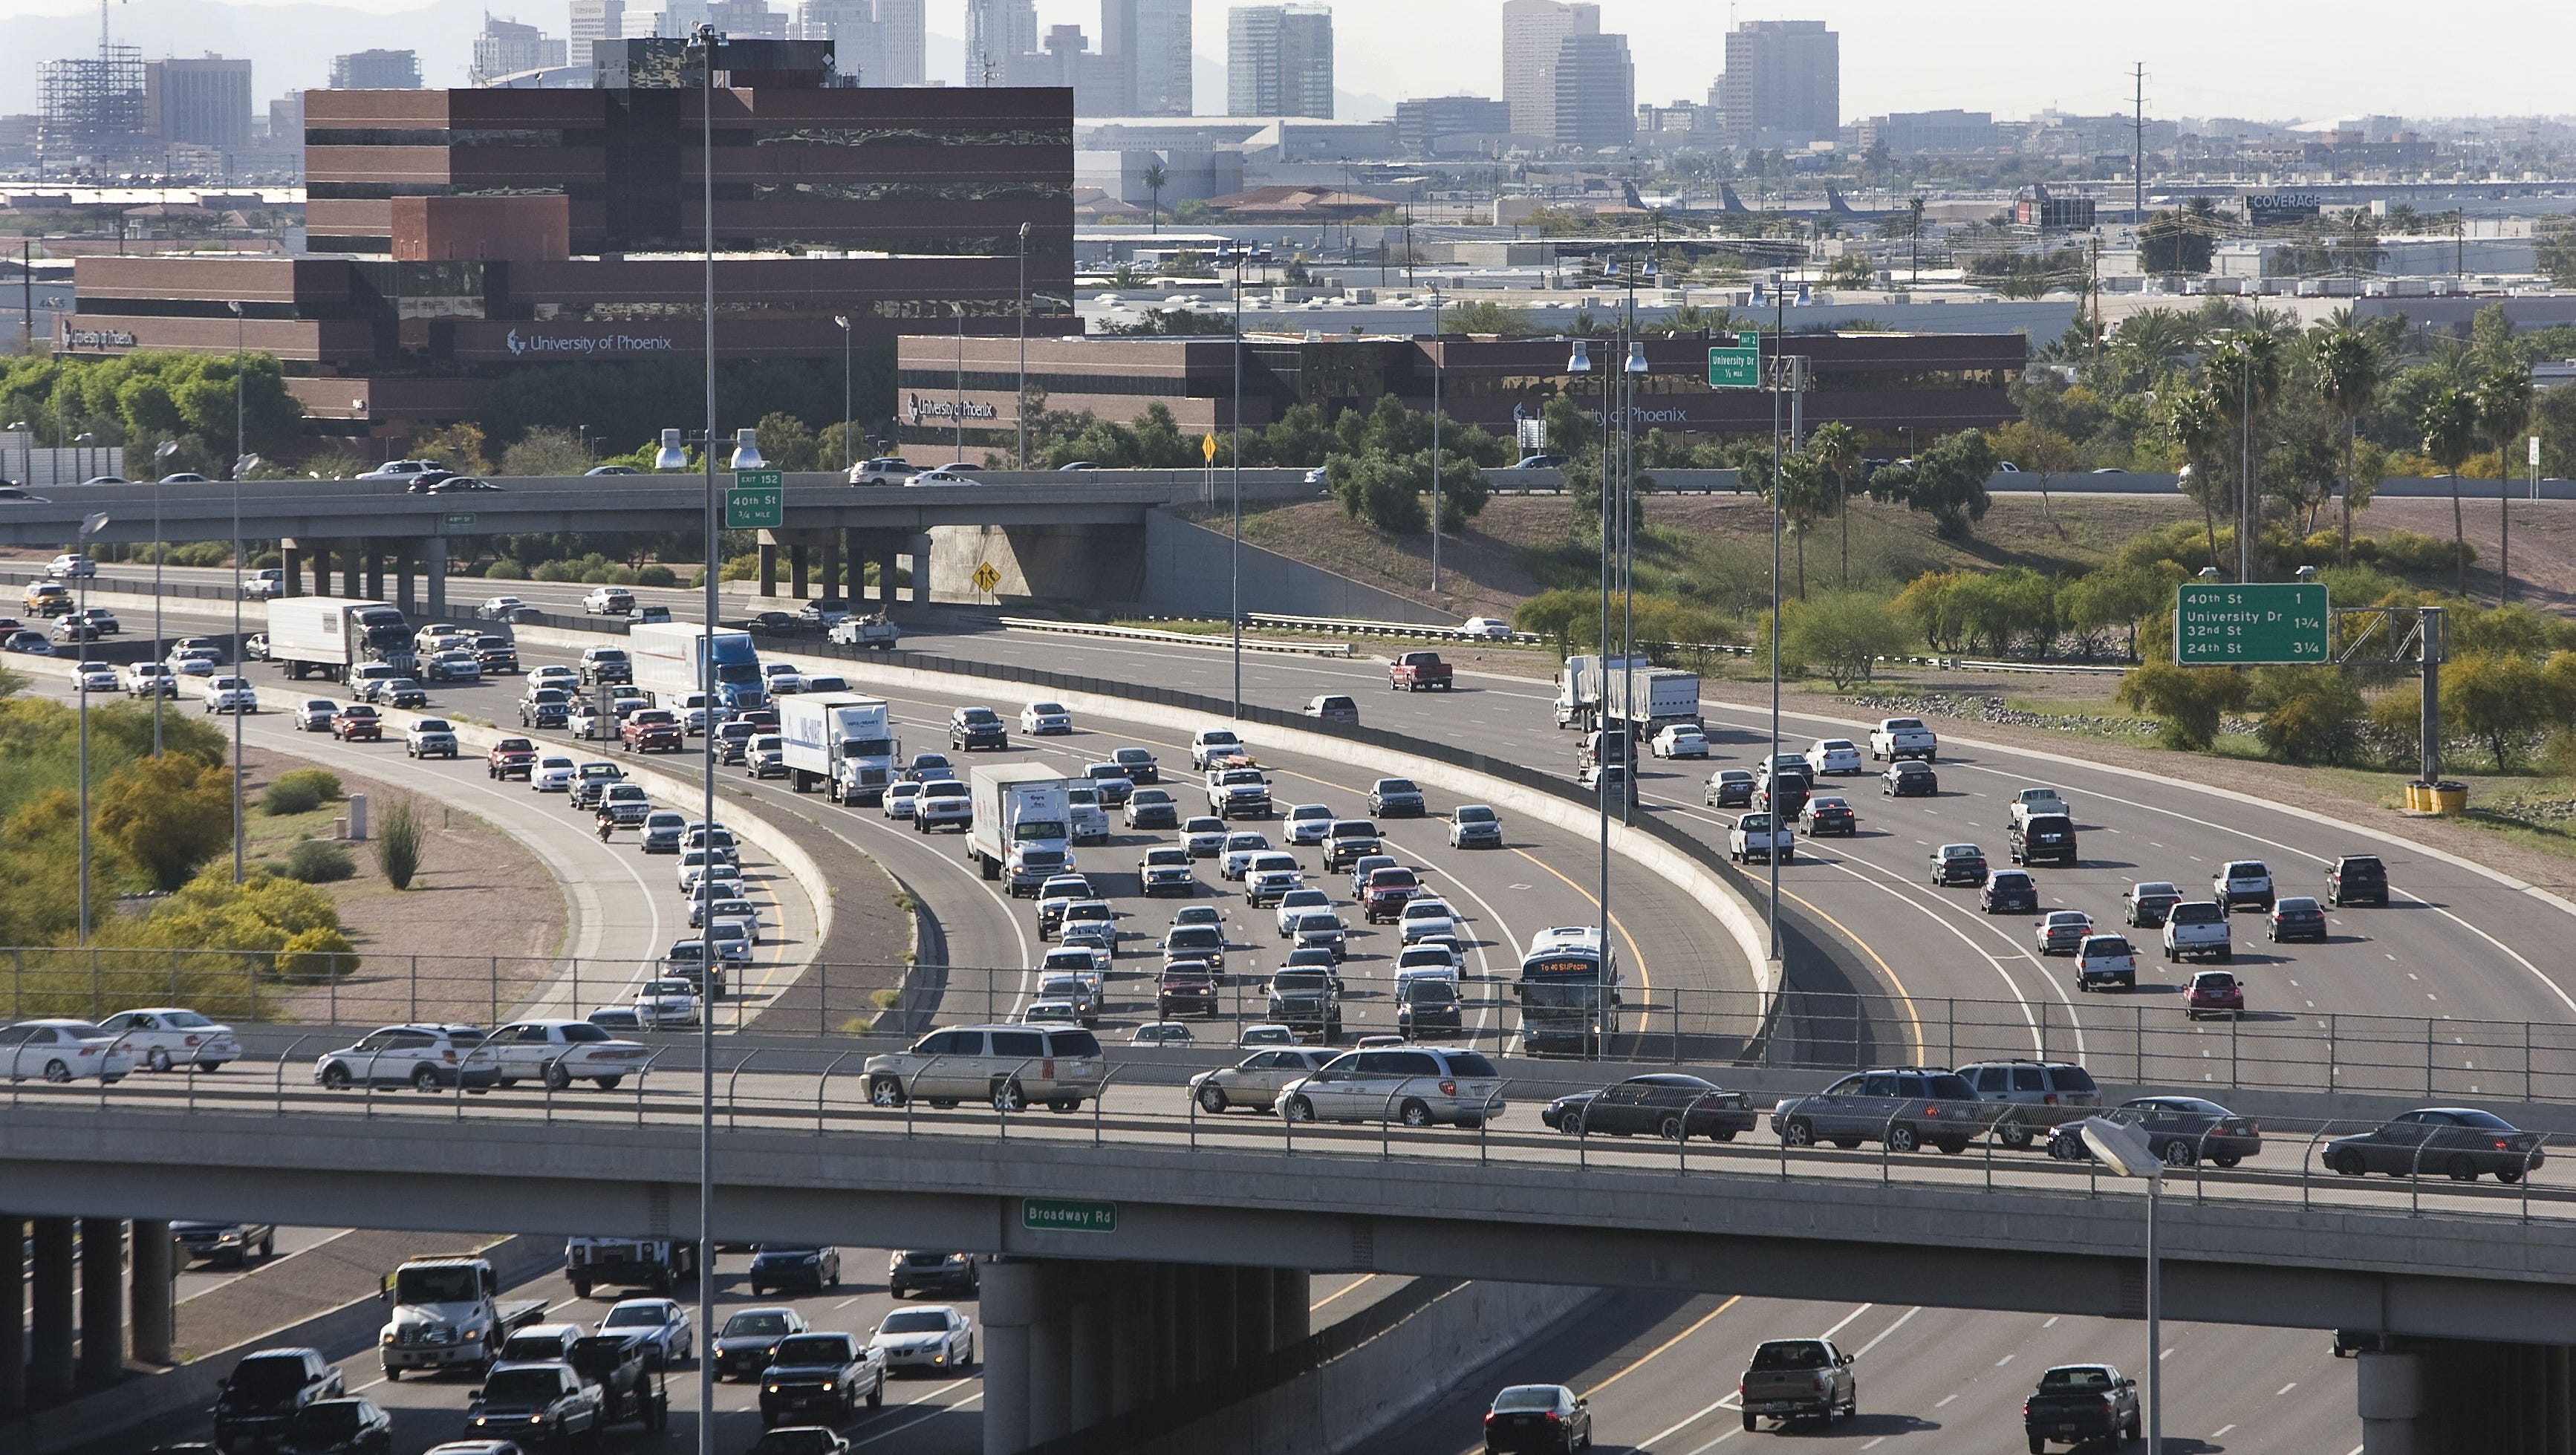 Adot Proposes 1 10 Improvements From Phoenix To Chandler